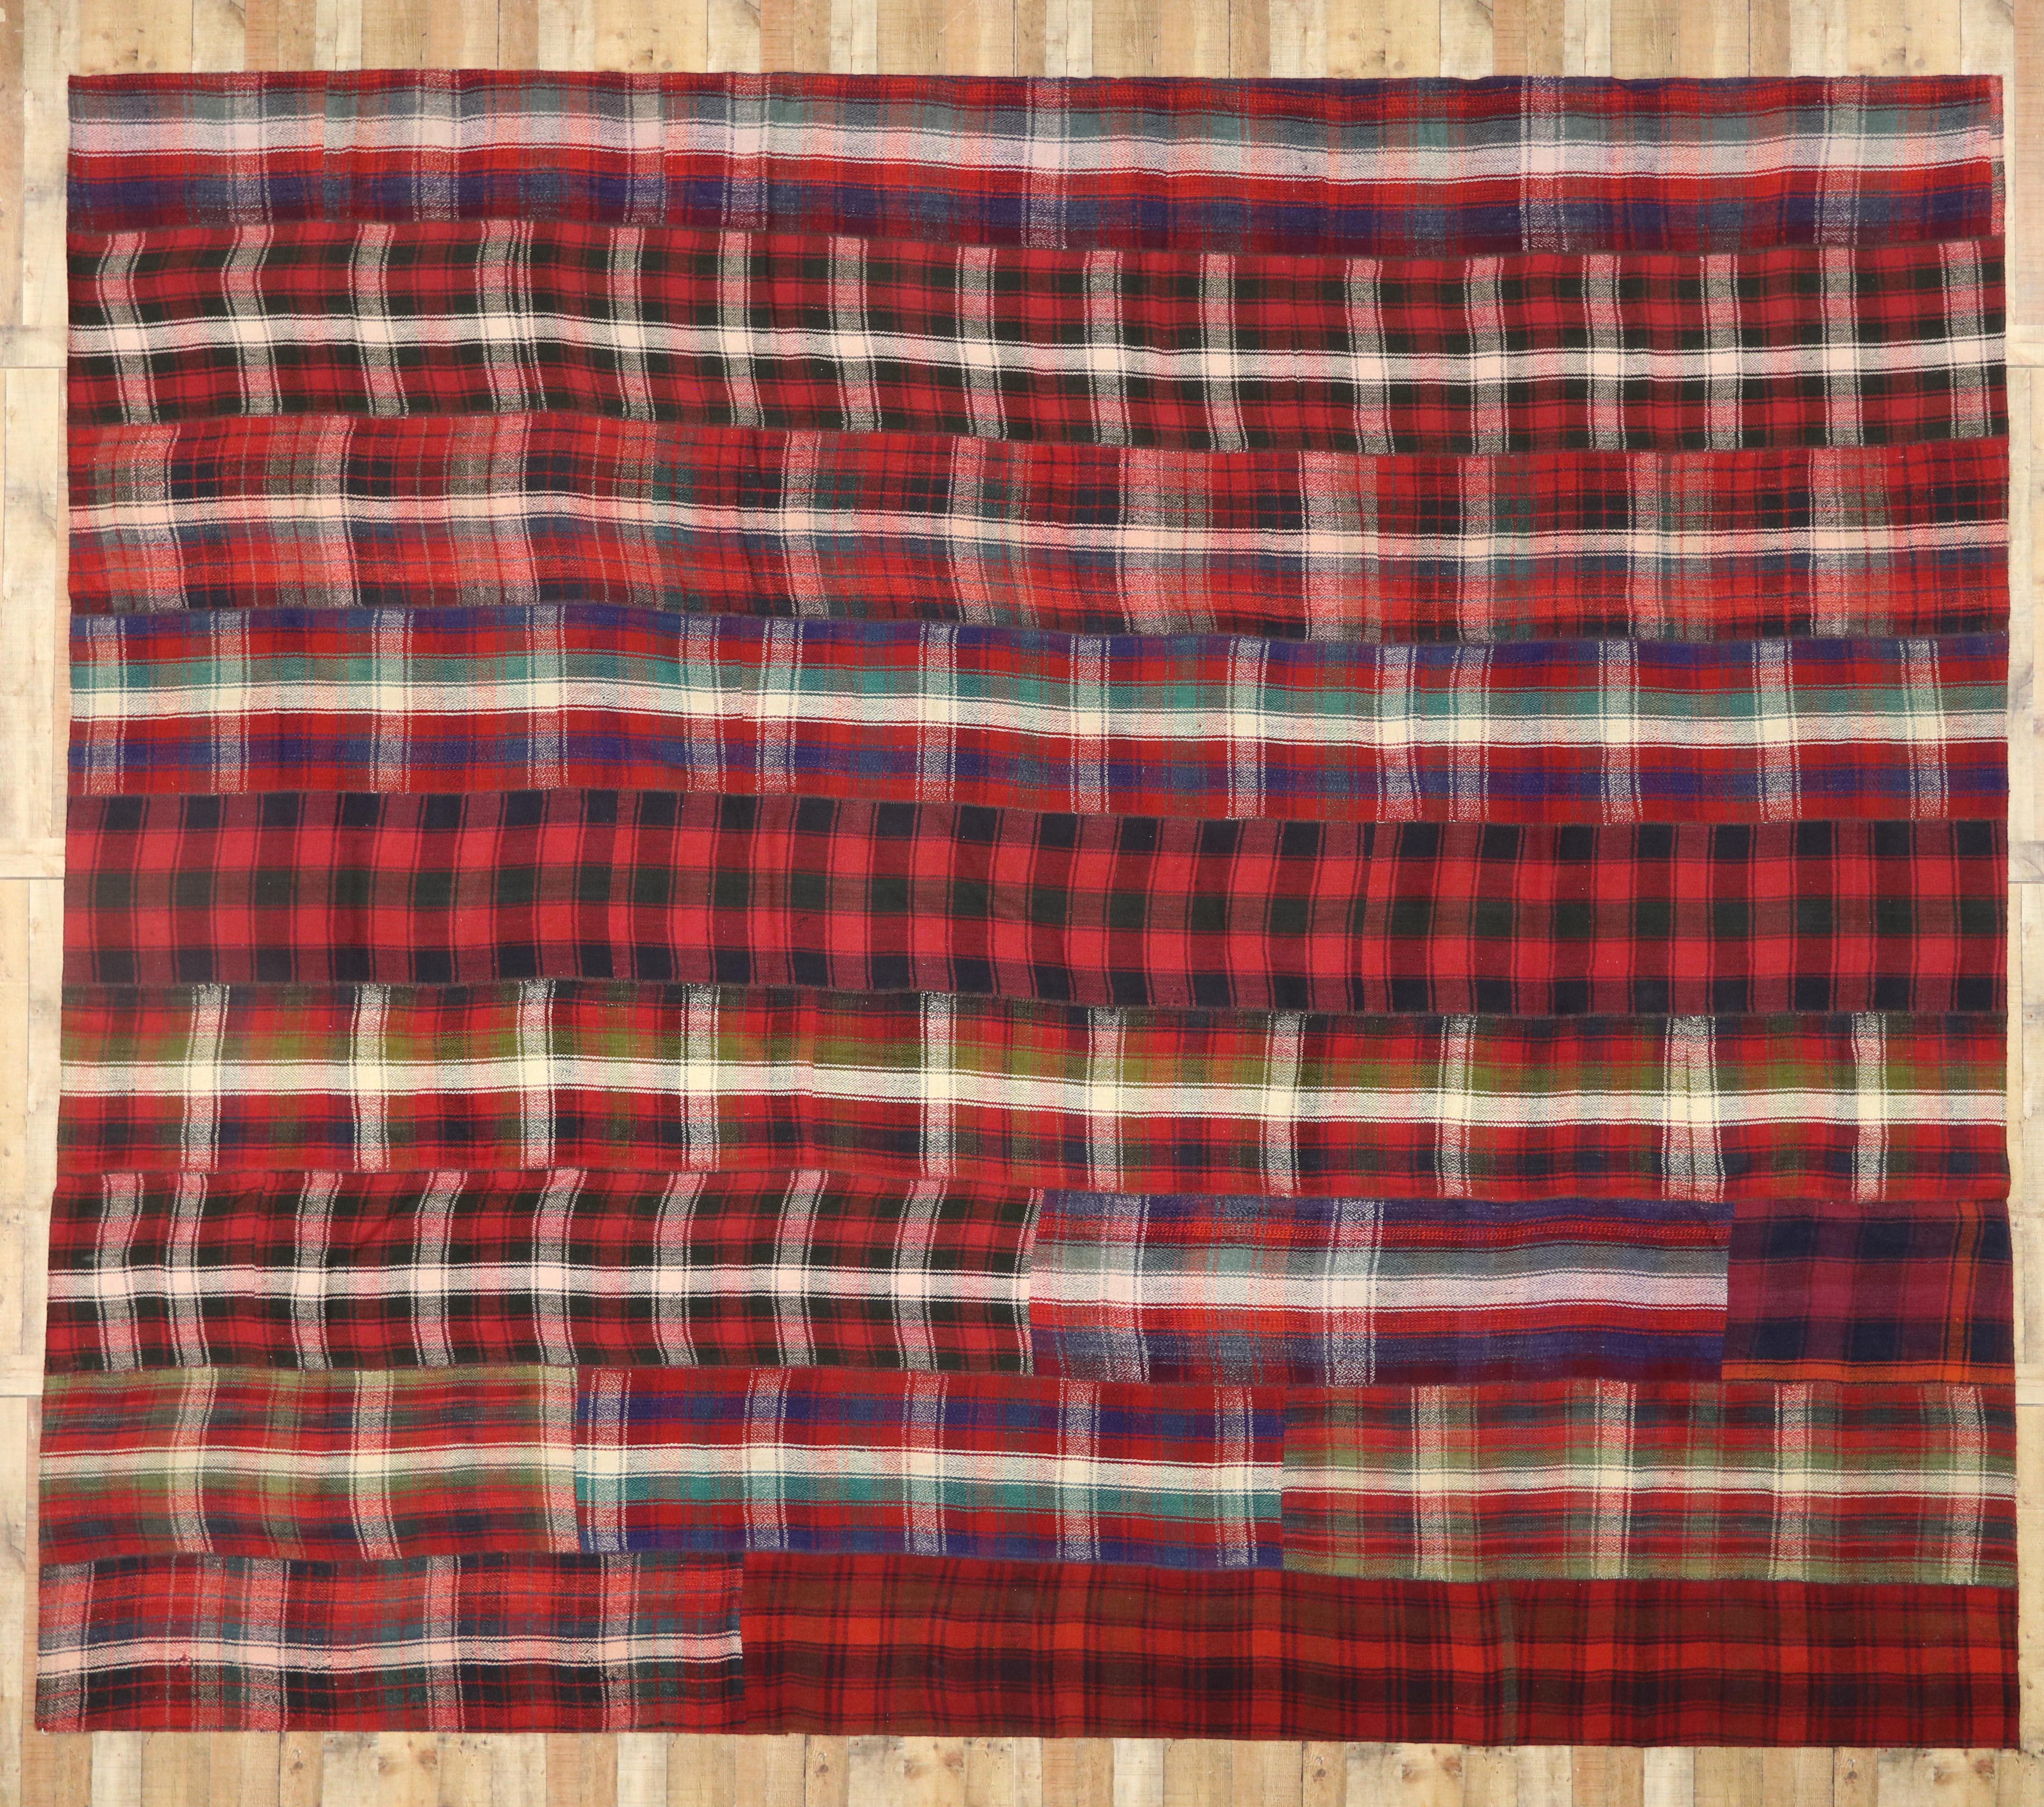 Hand-Woven Vintage Plaid Kilim Rug with Timeless Tartan Charm and Luxe Ralph Lauren Style For Sale